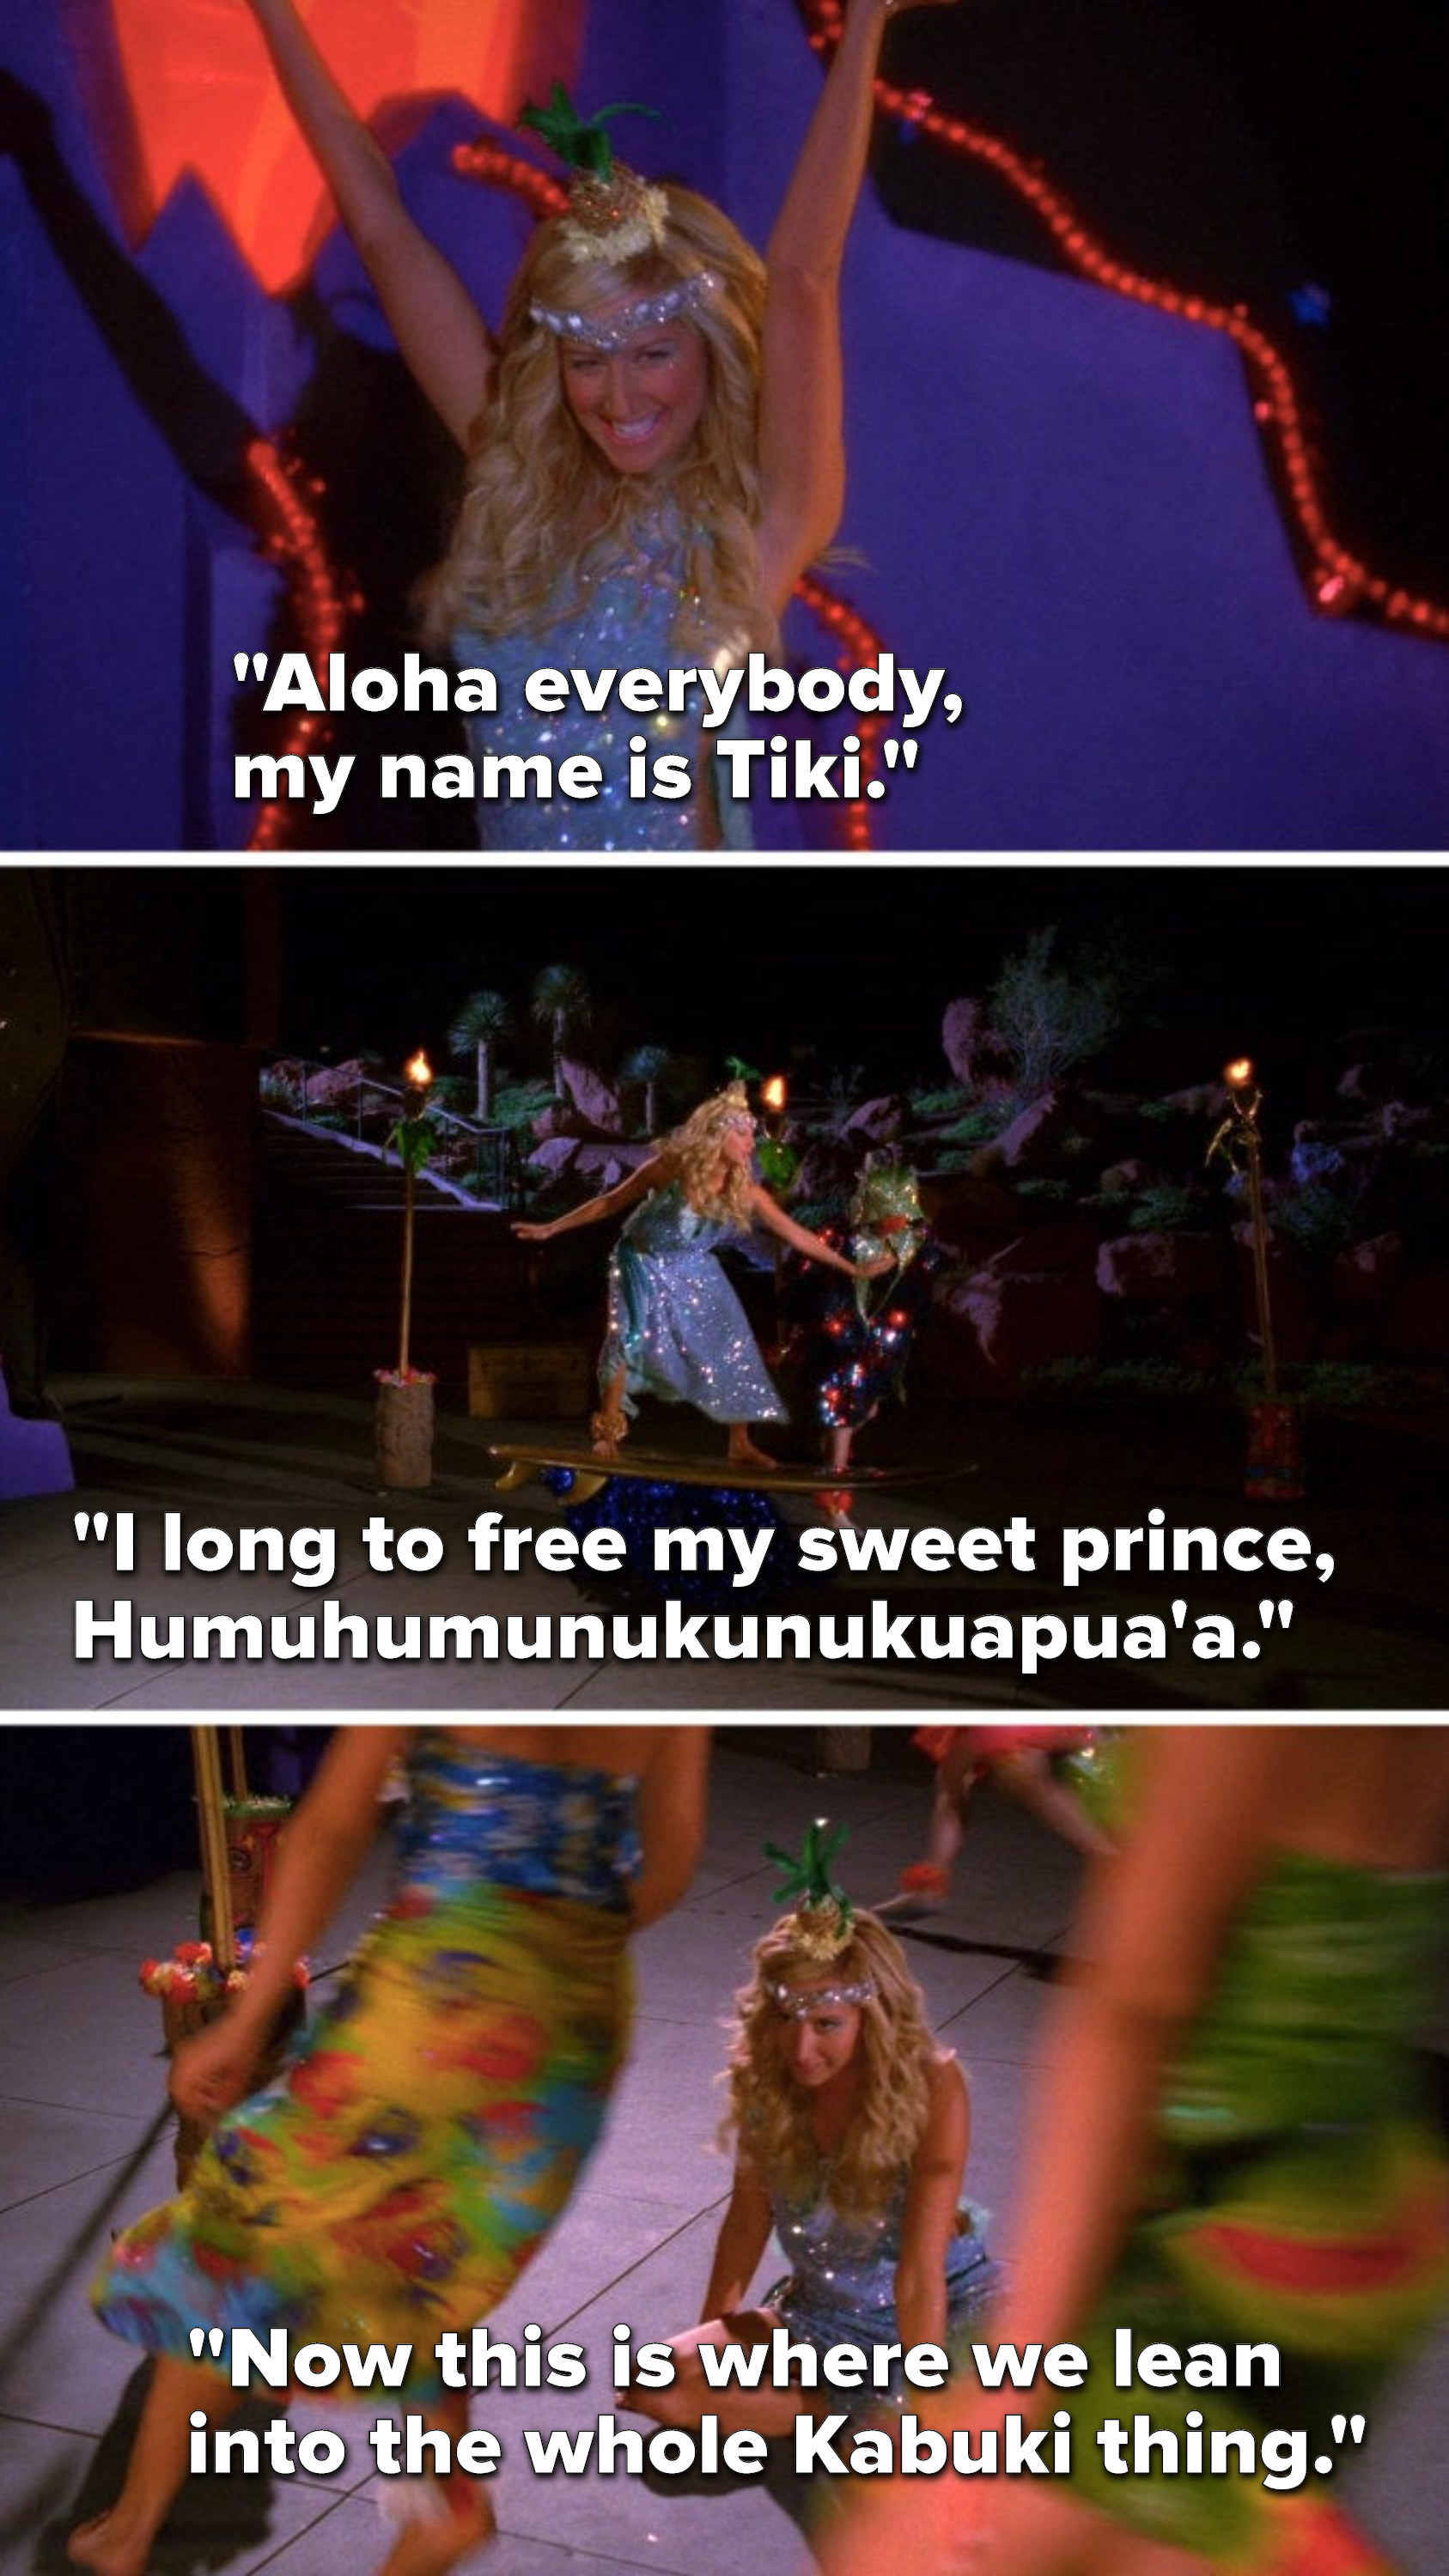 Sharpay sings, &quot;Aloha everybody, my name is Tiki,&quot; &quot;I long to free my sweet prince, Humuhumunukunukuapua&#x27;a,&quot; and says, &quot;Now this is where we lead into the whole Kabuki thing&quot;